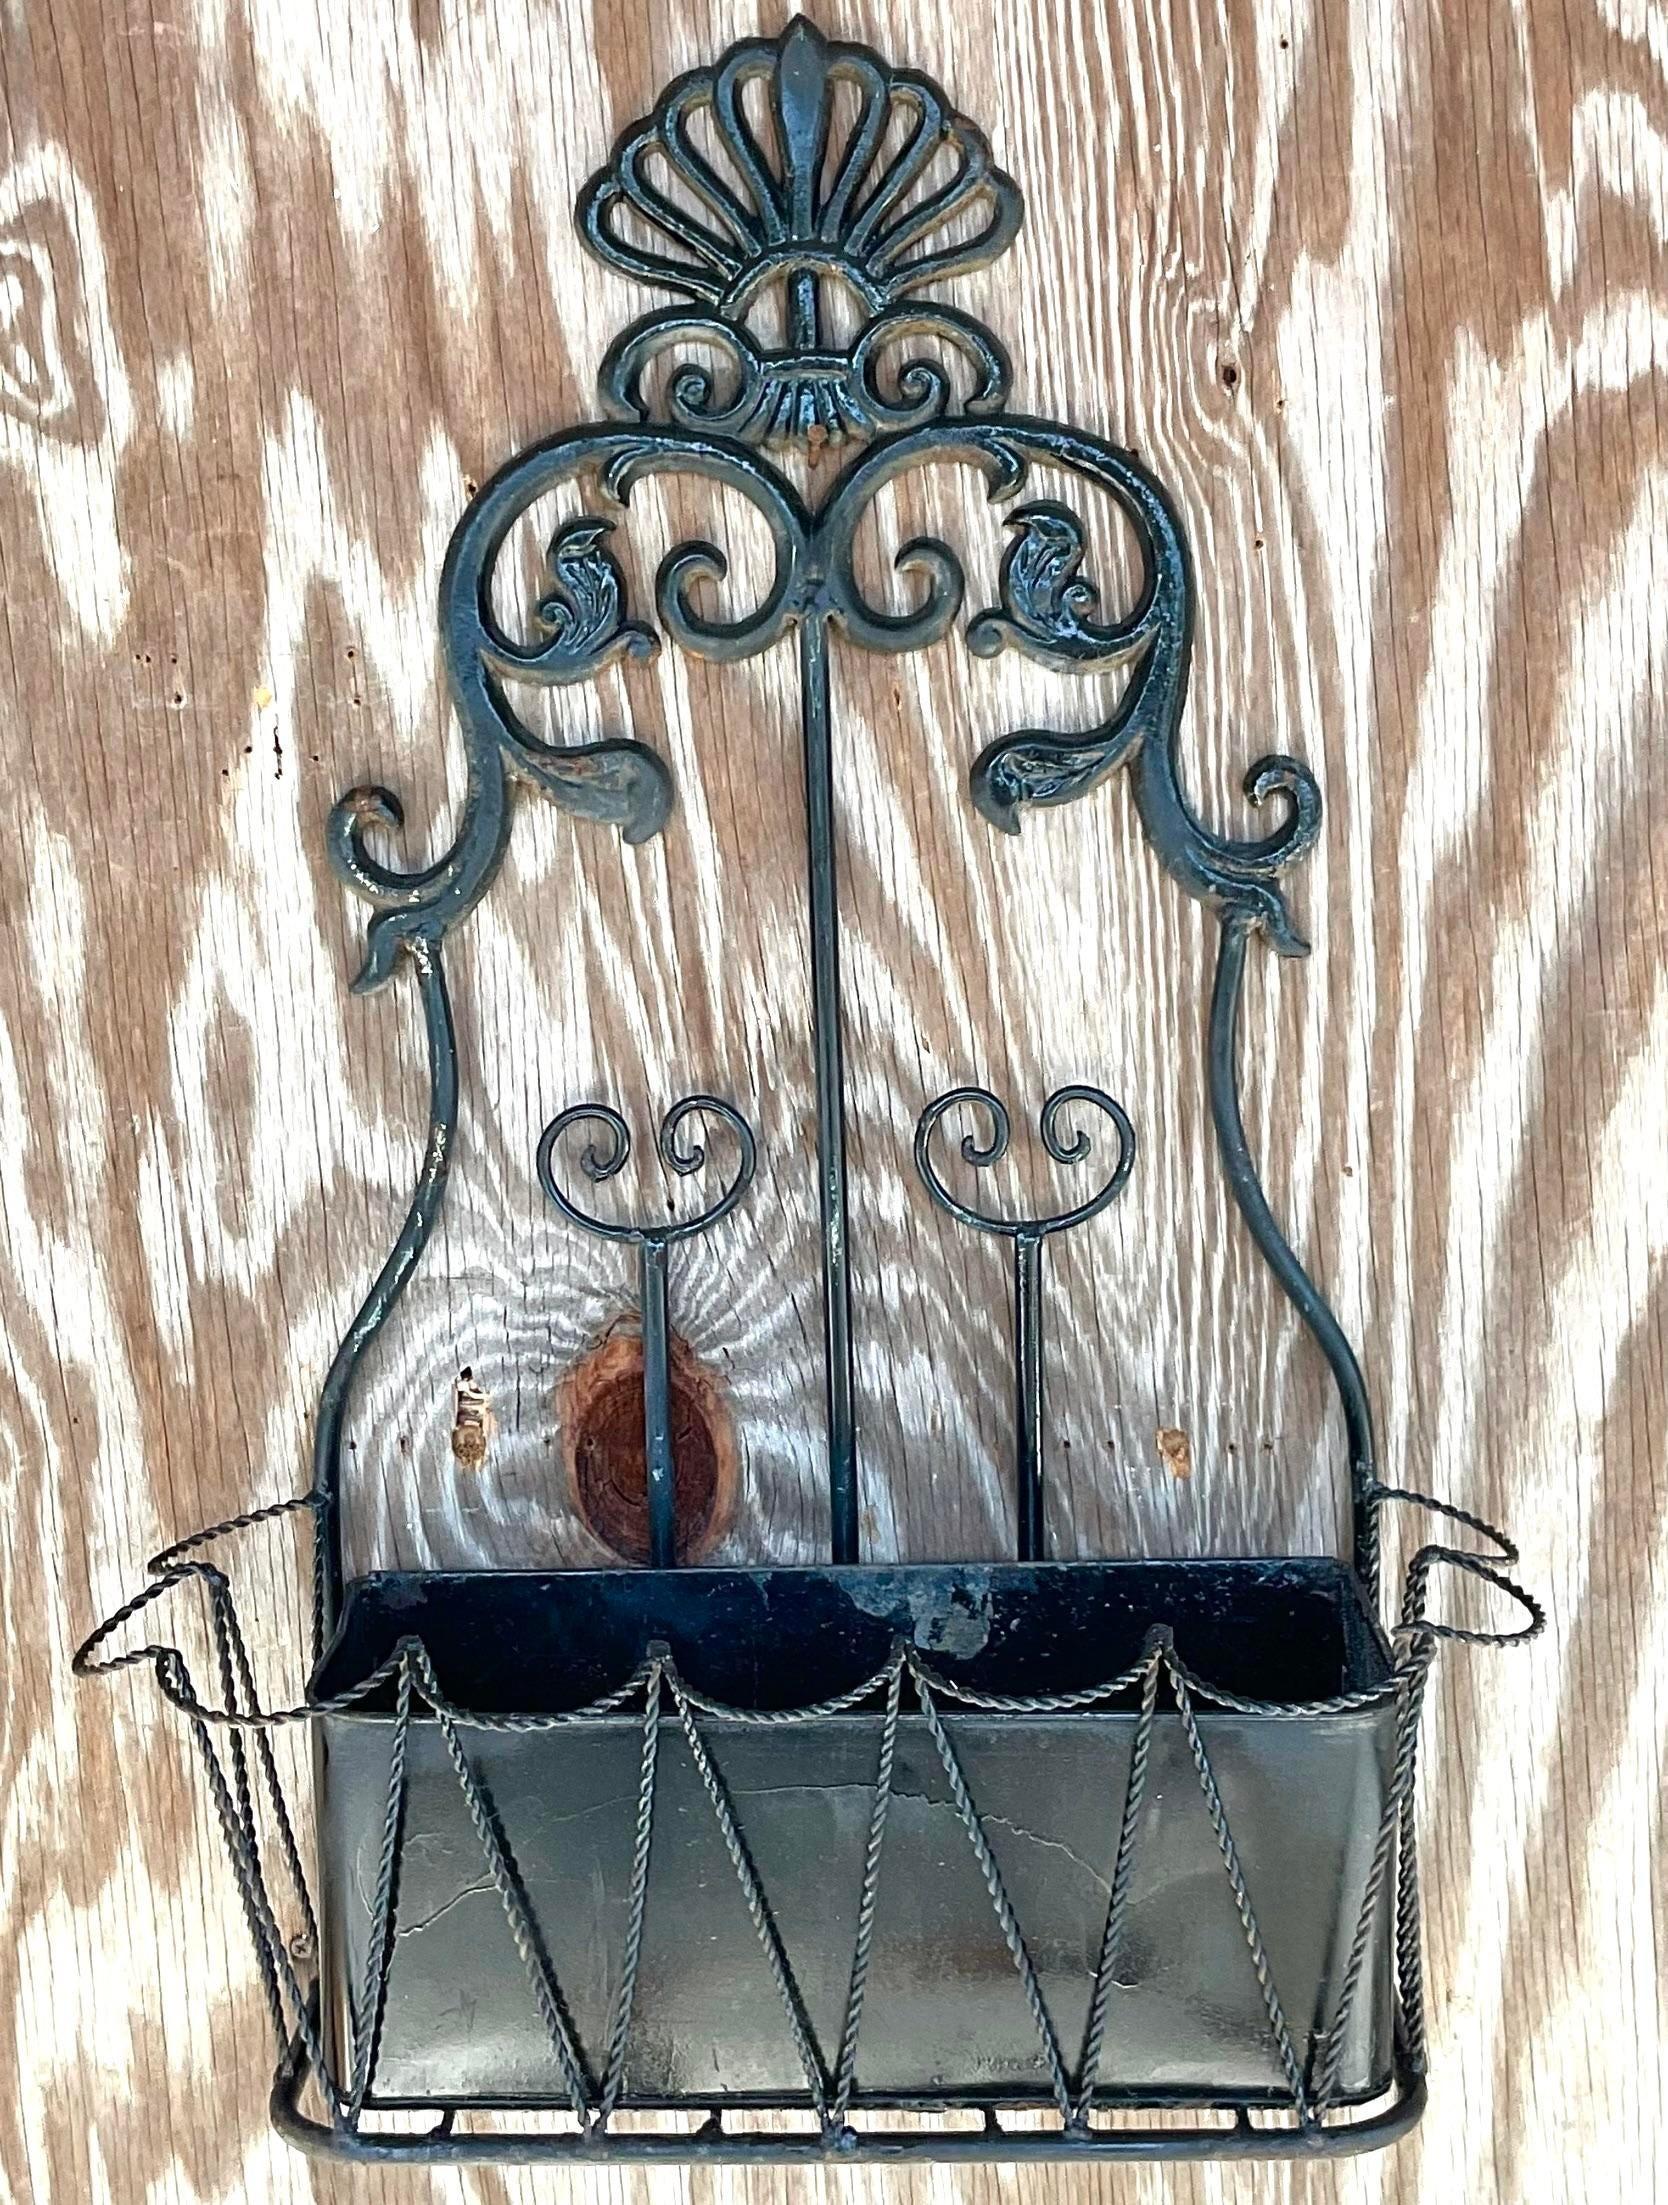 American Vintage Boho Wrought Iron Hanging Wall Planter For Sale